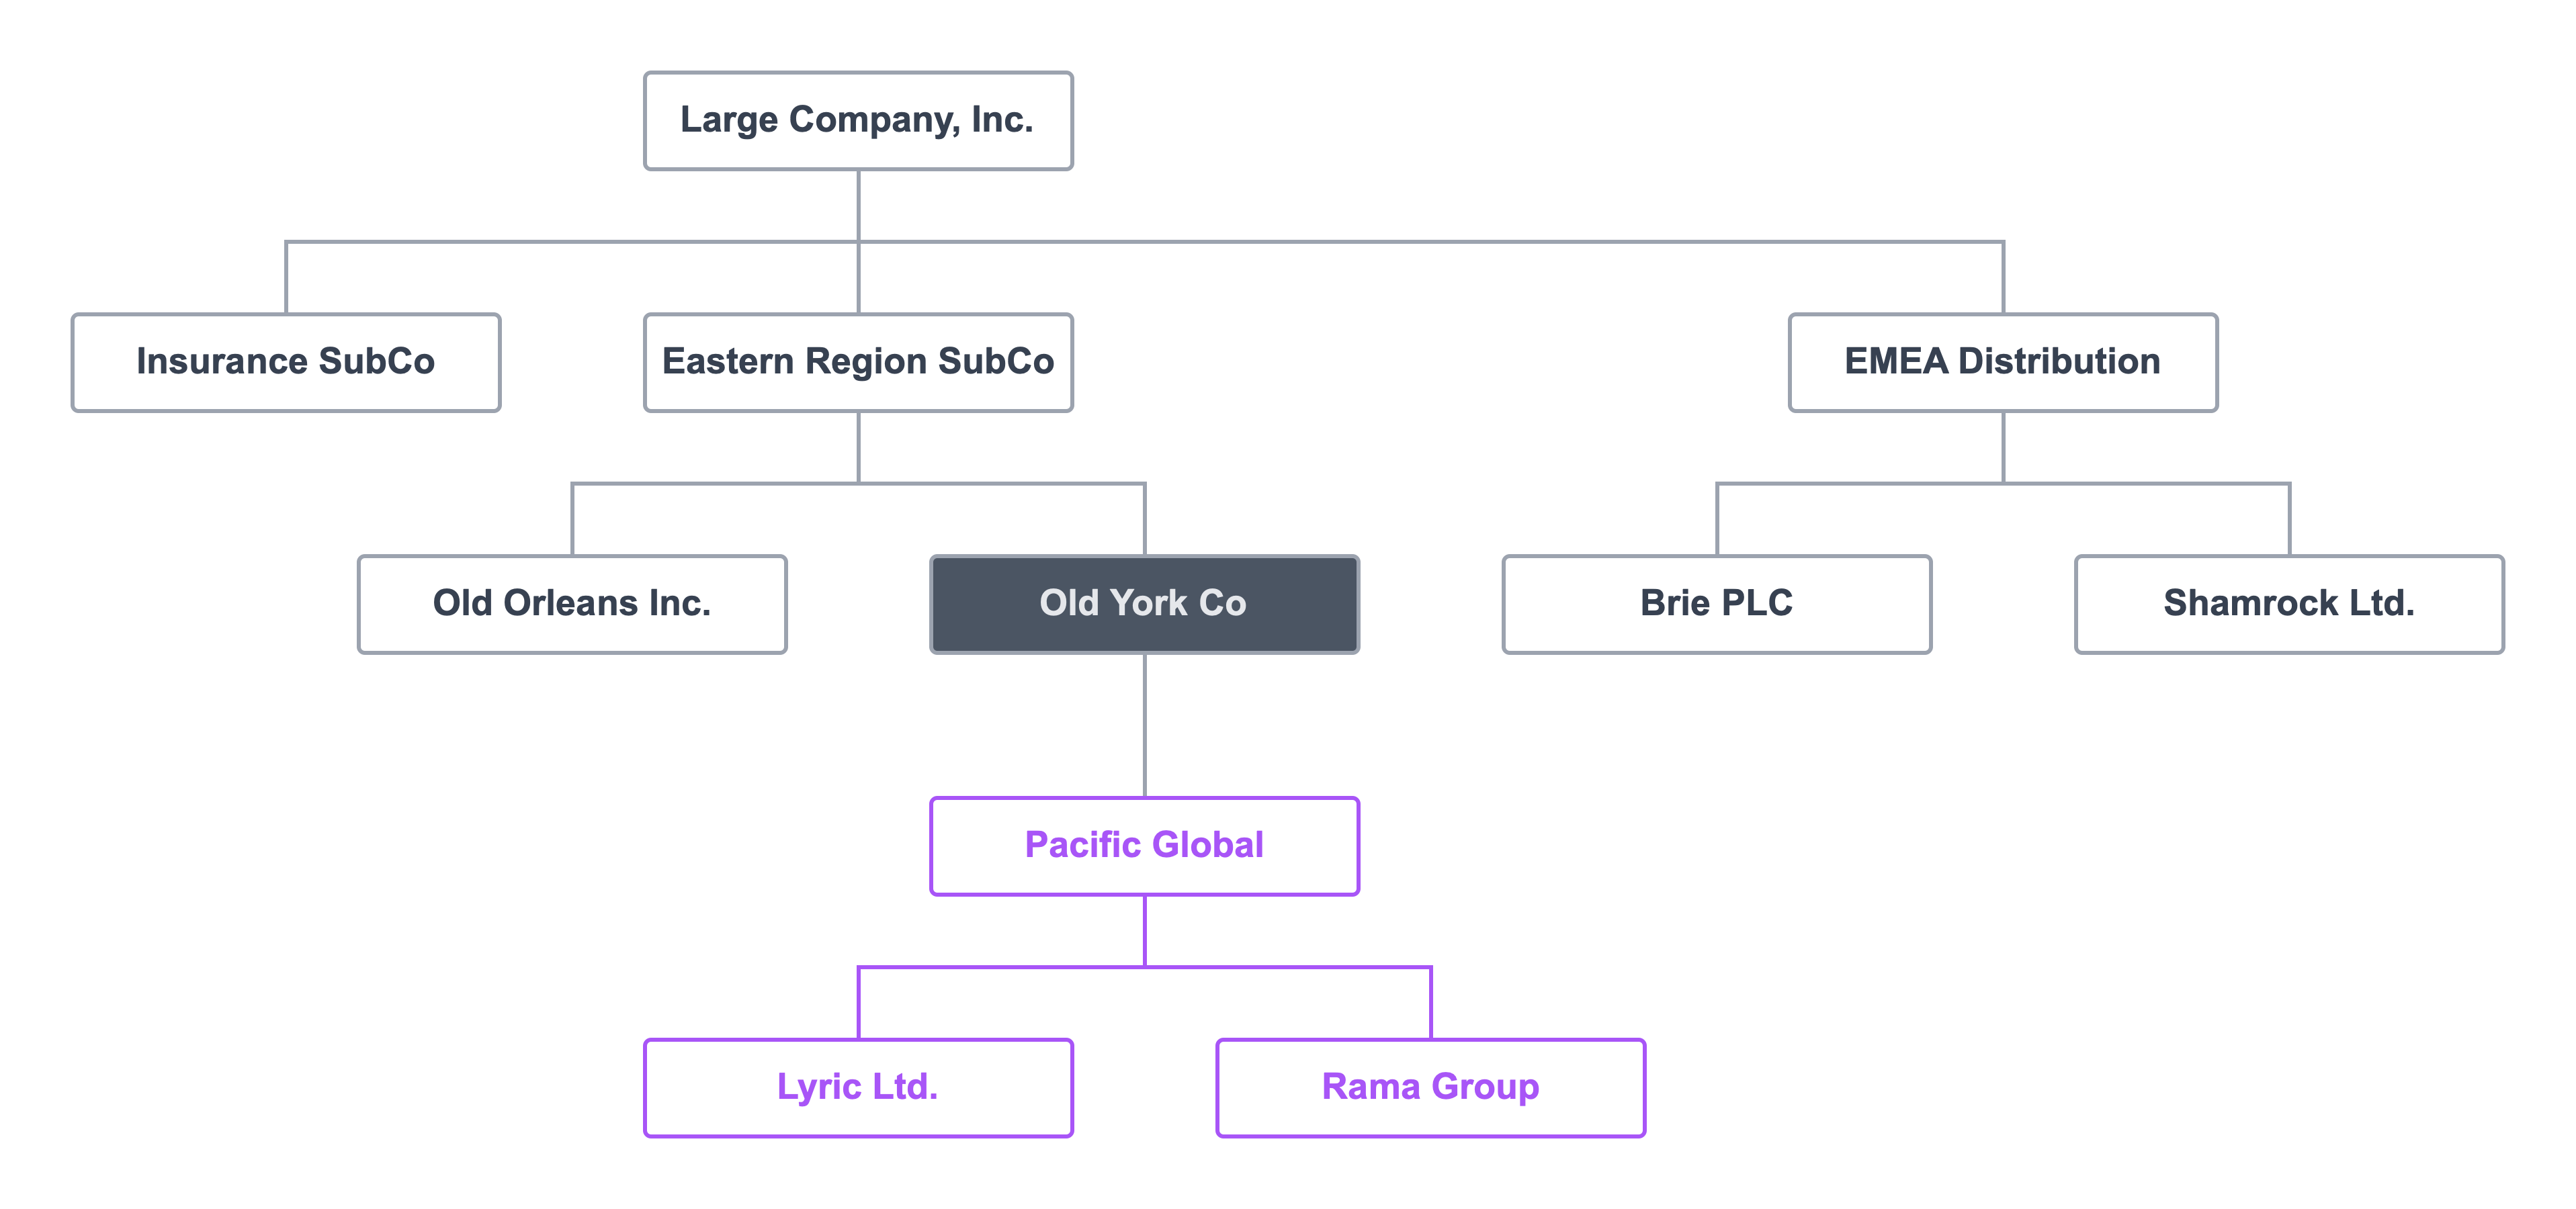 One possible acquisition structure